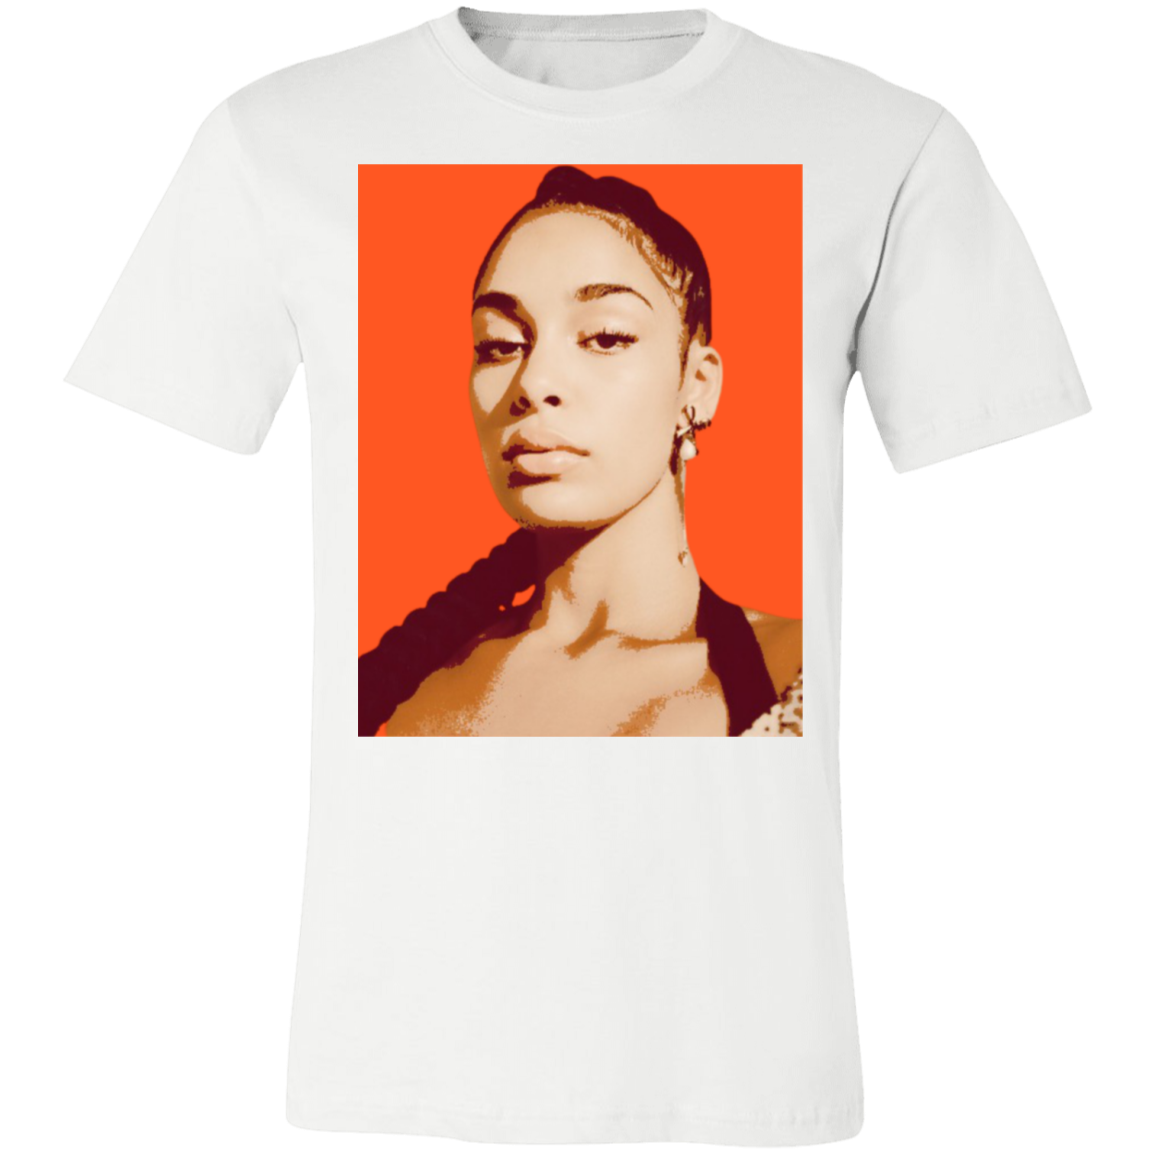 alicia key graphic tee in white, the design has an orange background